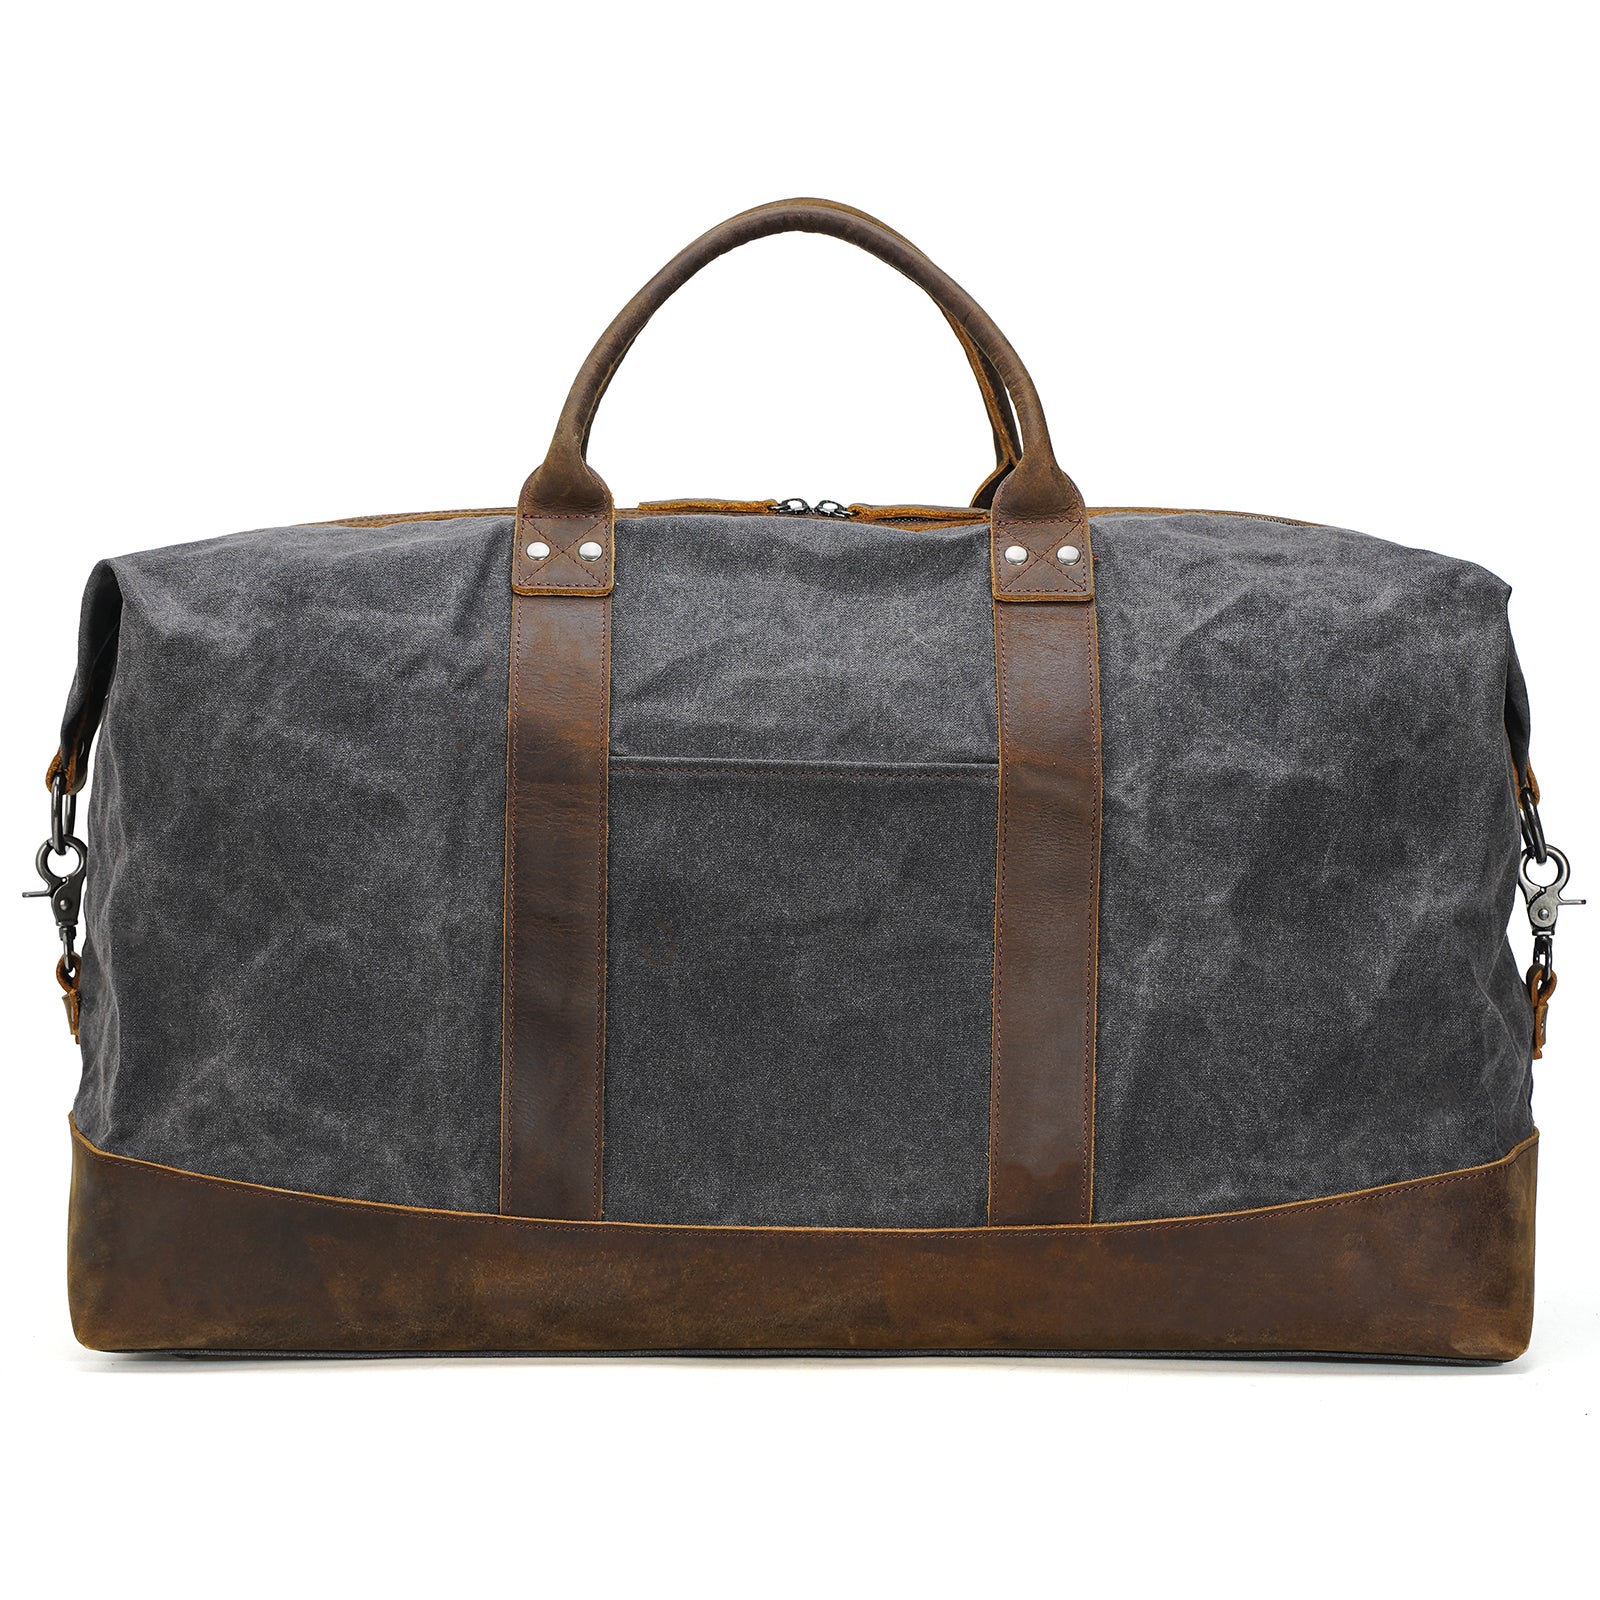 Polare 23” Cowhide Leather Waterproof Waxed Canvas Travel Duffel Bag (Grey,Back)